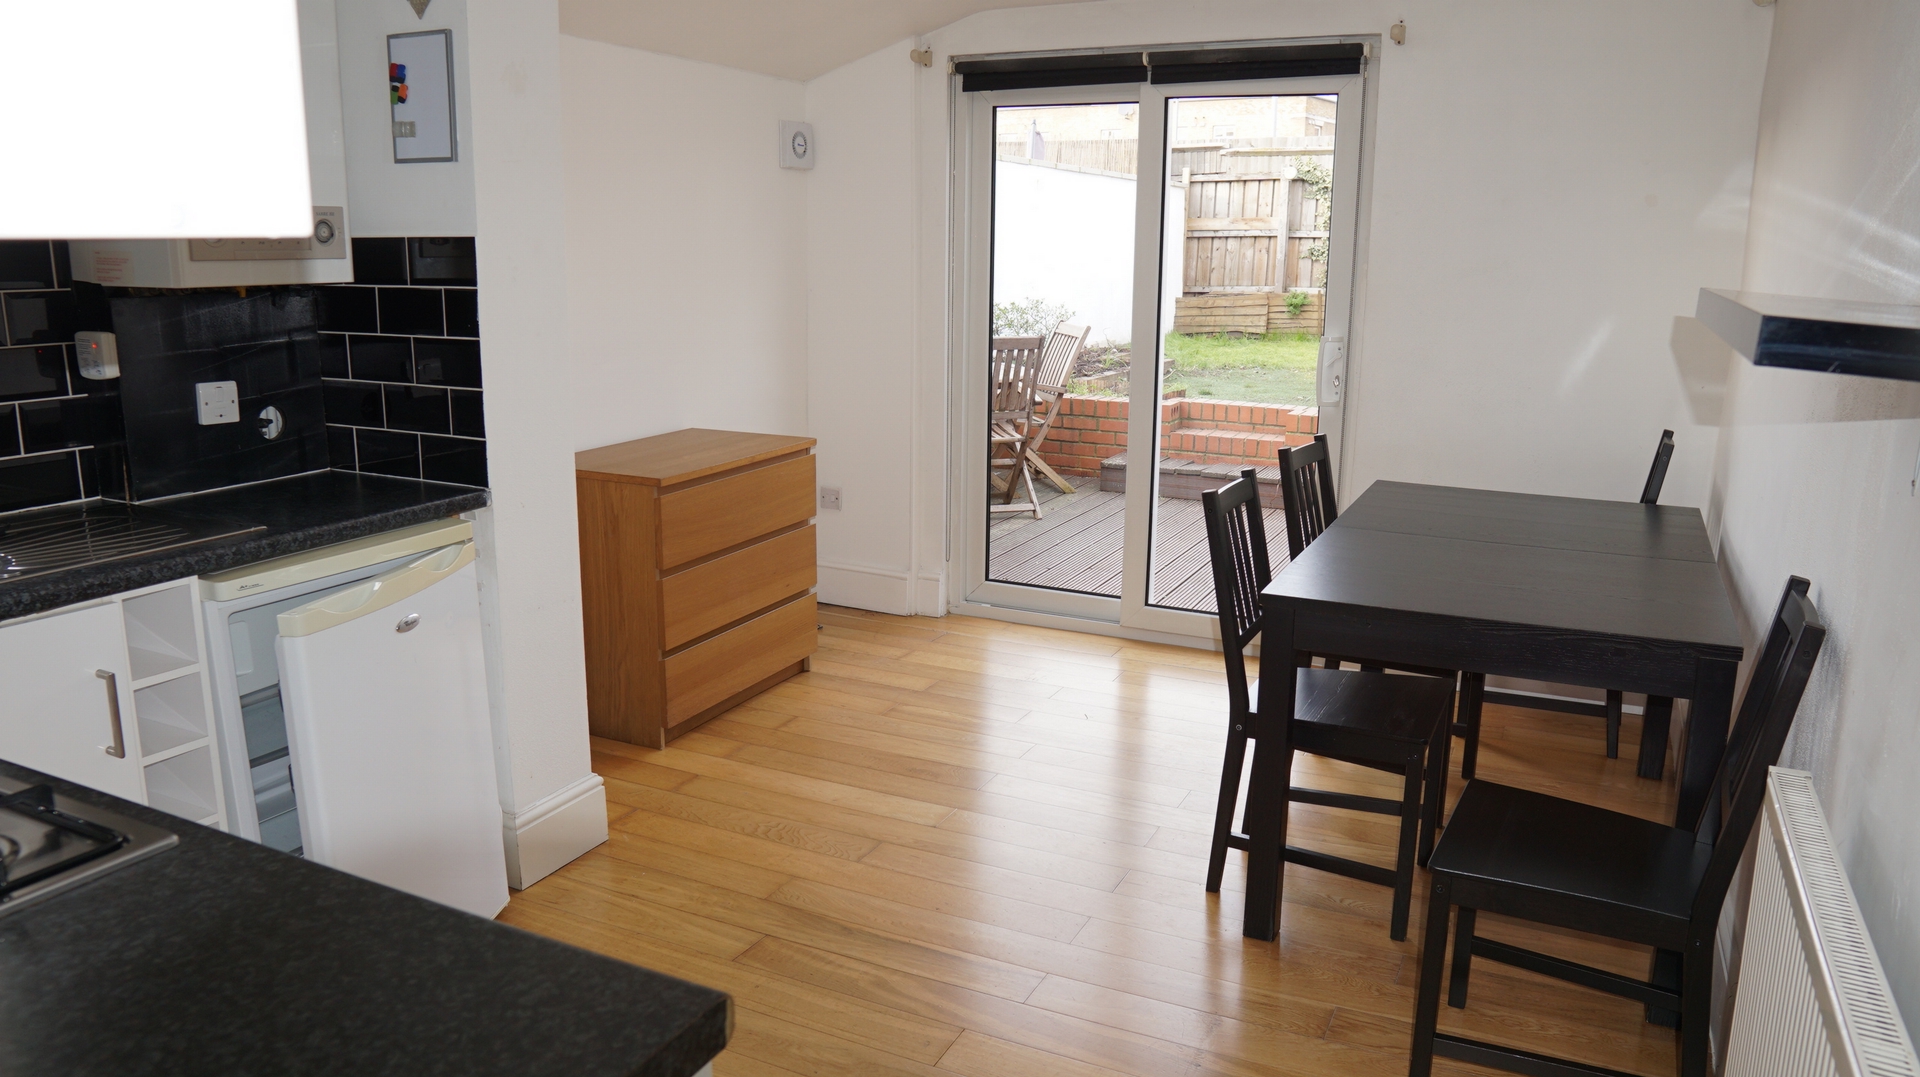 1 Bedroom Conversion to rent in Tooting, London, SW17